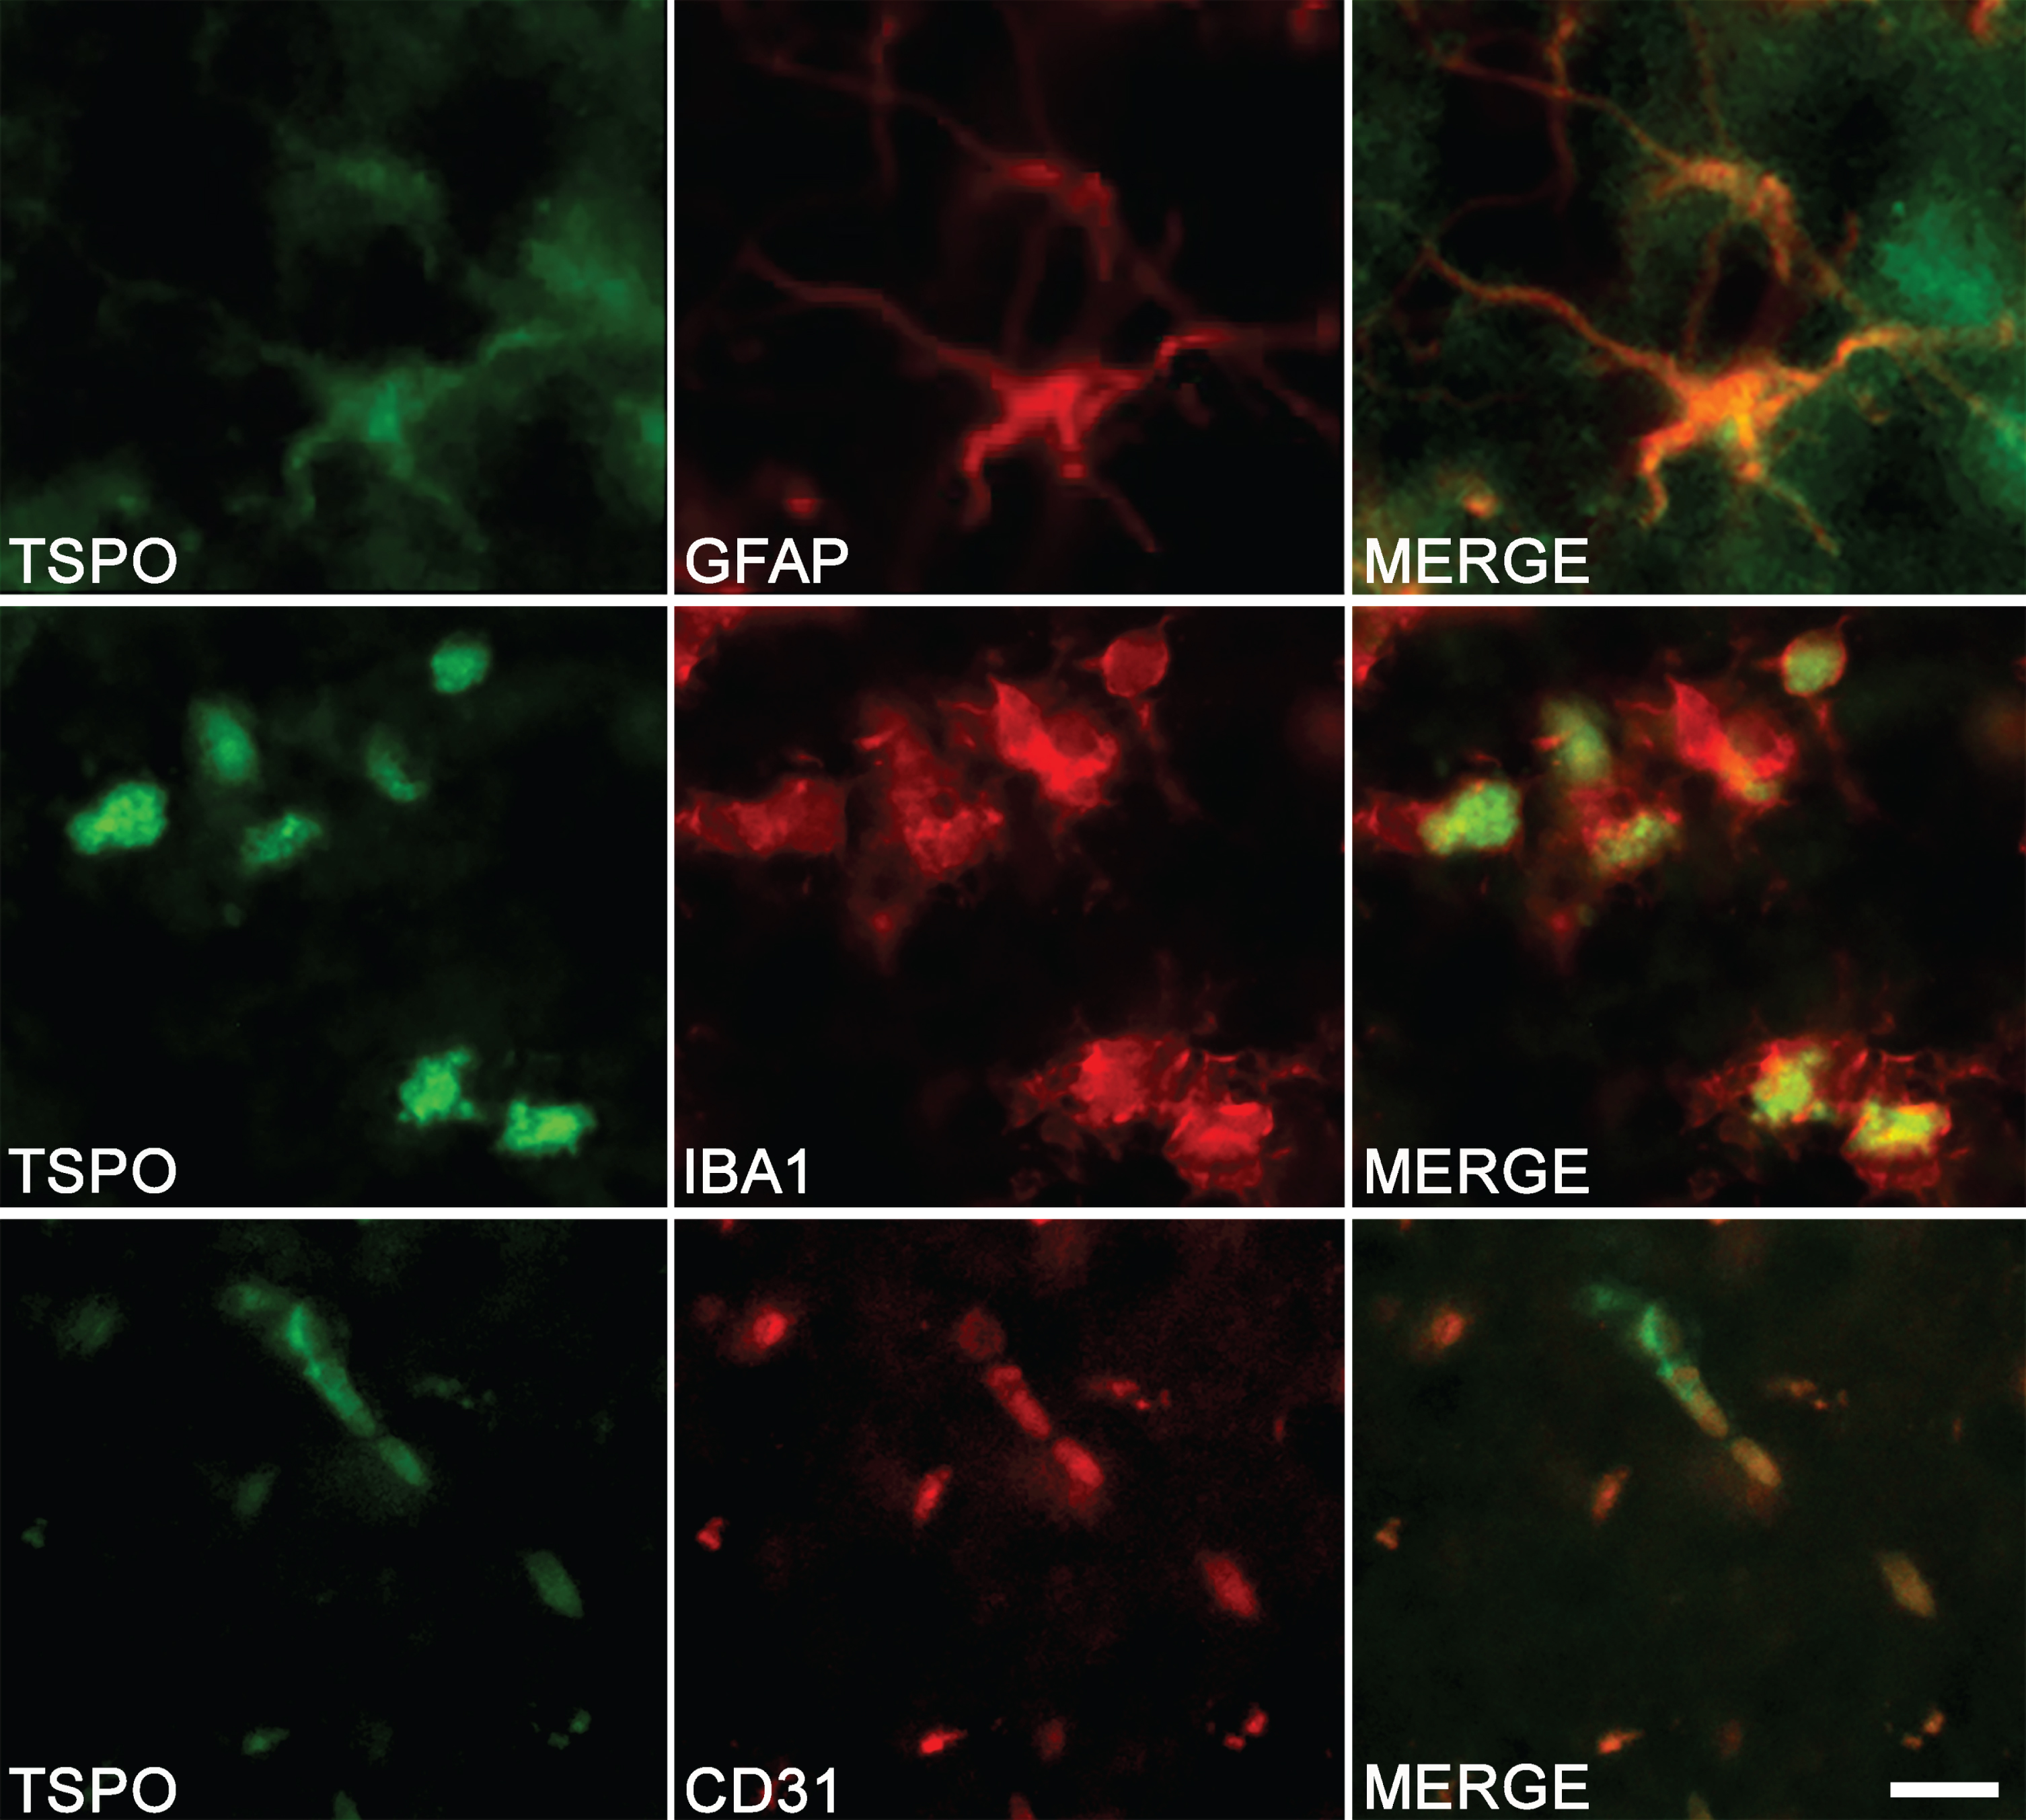 Cell origin confirmation of TSPO expression in the hippocampus of TgF344-AD rats. Double-immunofluorescence was performed with antibodies directed against TSPO (green color) and specific cell markers (red color). Merge images demonstrate the colocalization of TSPO with astrocytes (GFAP), microglia (IBA1), and endothelial cells (CD31). Scale bar: 10μm.